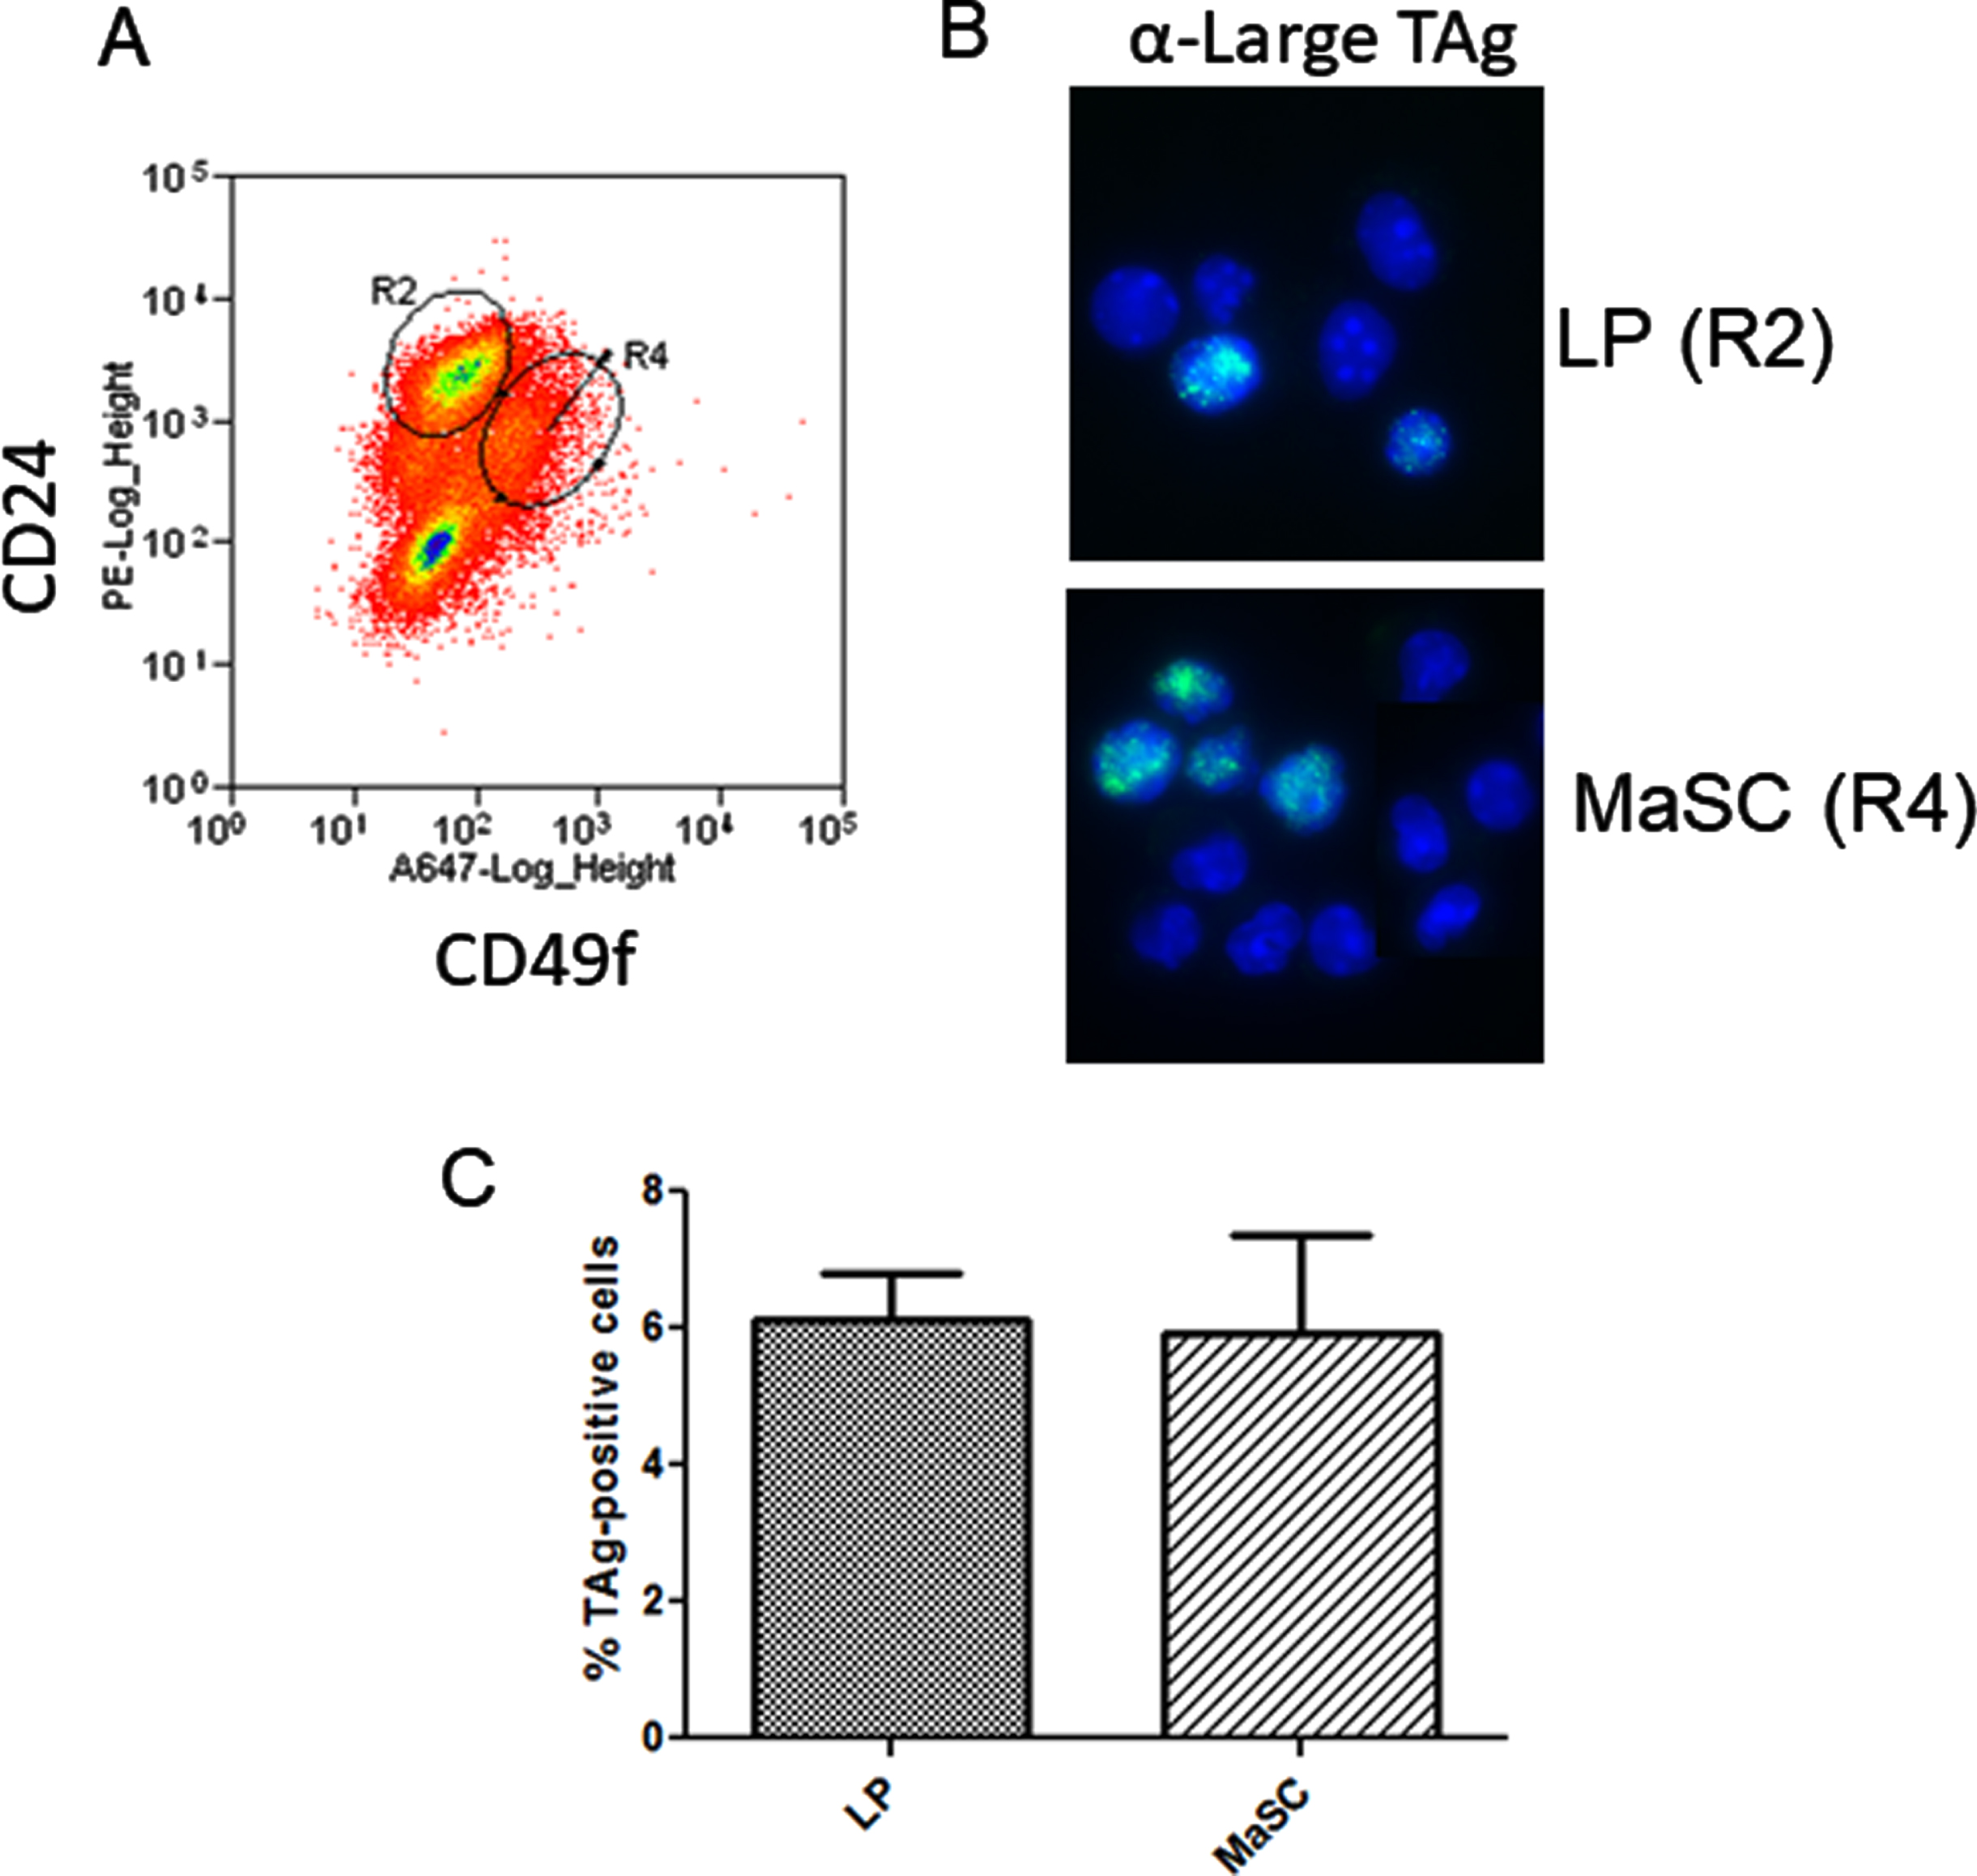 C3(1)-SV40-TAg is expressed in basal and luminal mammary progenitors: A, Linneg mammary gland cells from 8 week old virgin C3(1)TAg transgenic mice were isolated and subjected to FACS analysis to enrich mammary luminal progenitors and basal/MaSc populations using linp ∘s exclusion and CD24/CD49f immunophenotype. B, FACS-sorted cells were cytospun and IF performed to detect TAg. C, The percentage of TAg-expressing cells was calculated from counting total GFP-positive cells/ total DAPI nuclei. >200 cells per slide were counted. No significant difference between populations was obtained (unpaired t-test).